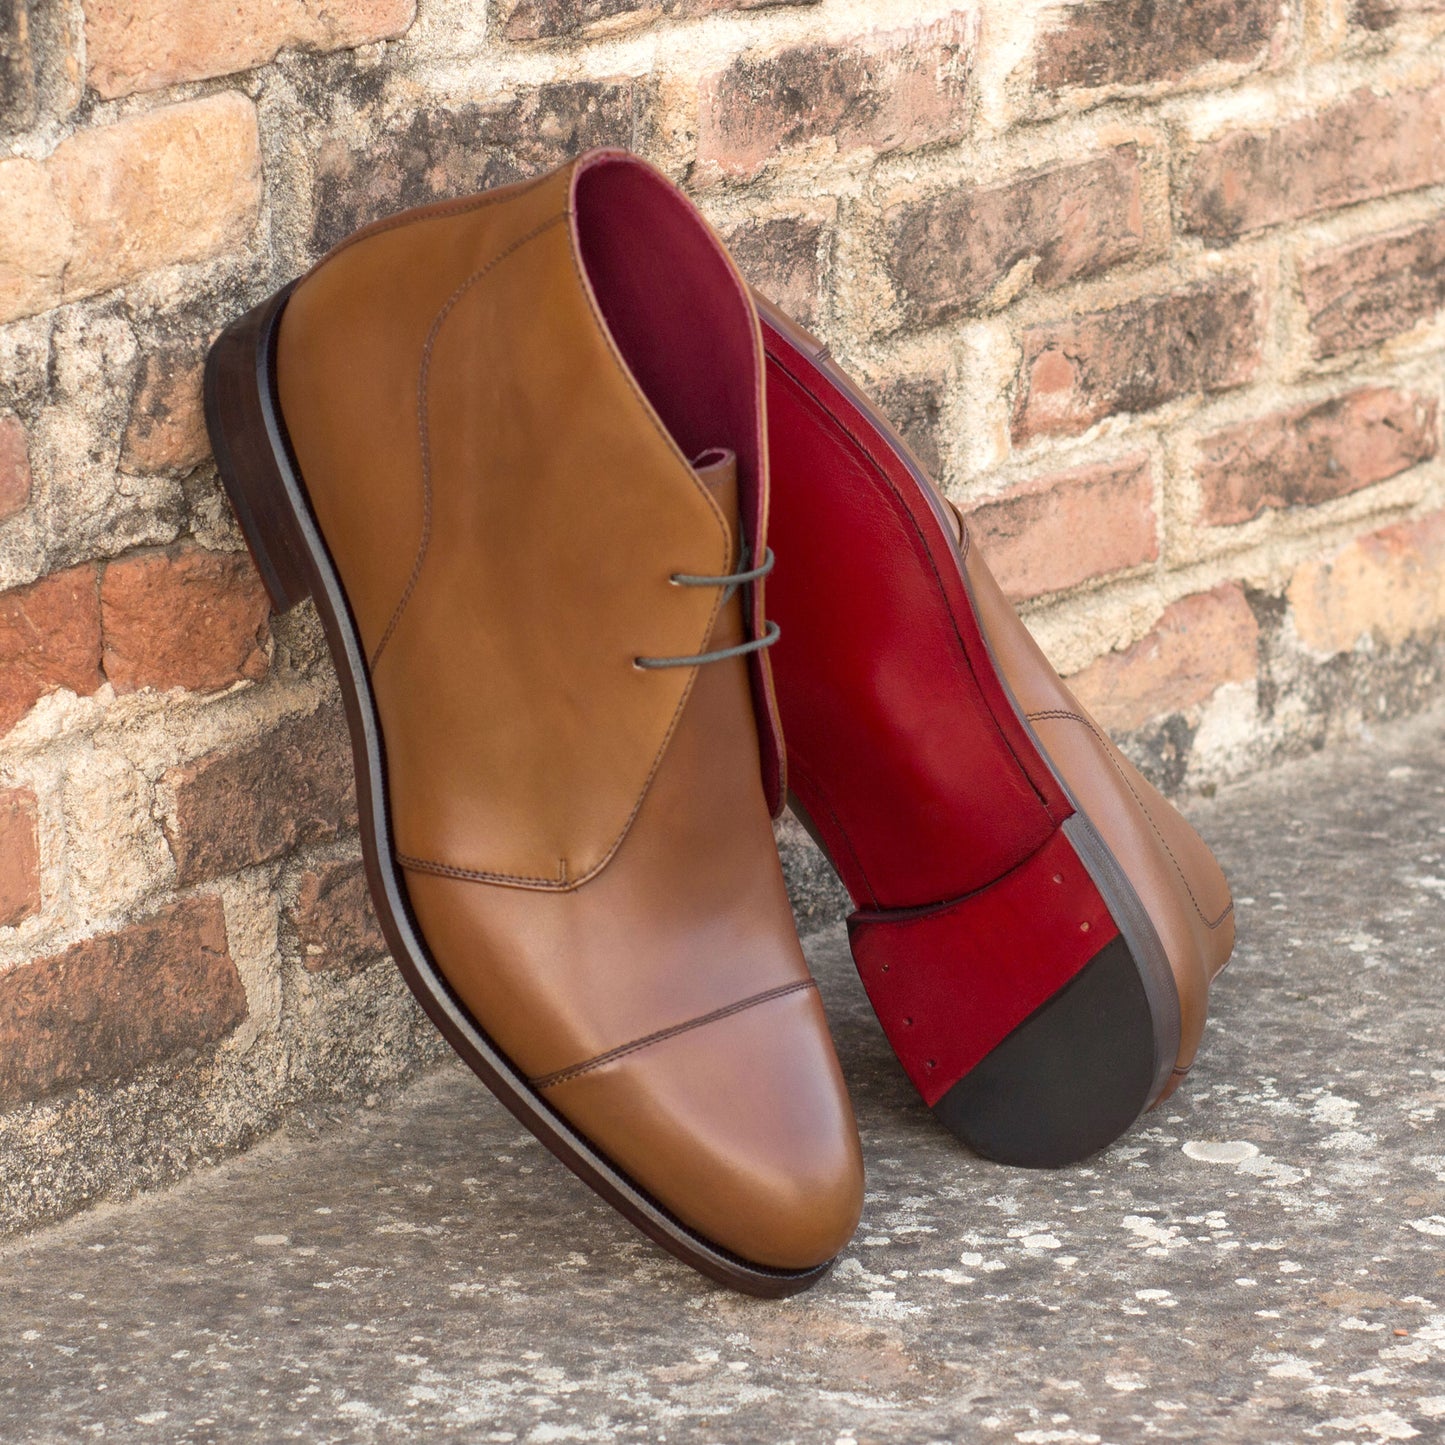 SUITCAFE Men's Chukka Boot Cognac Leather Red Soles